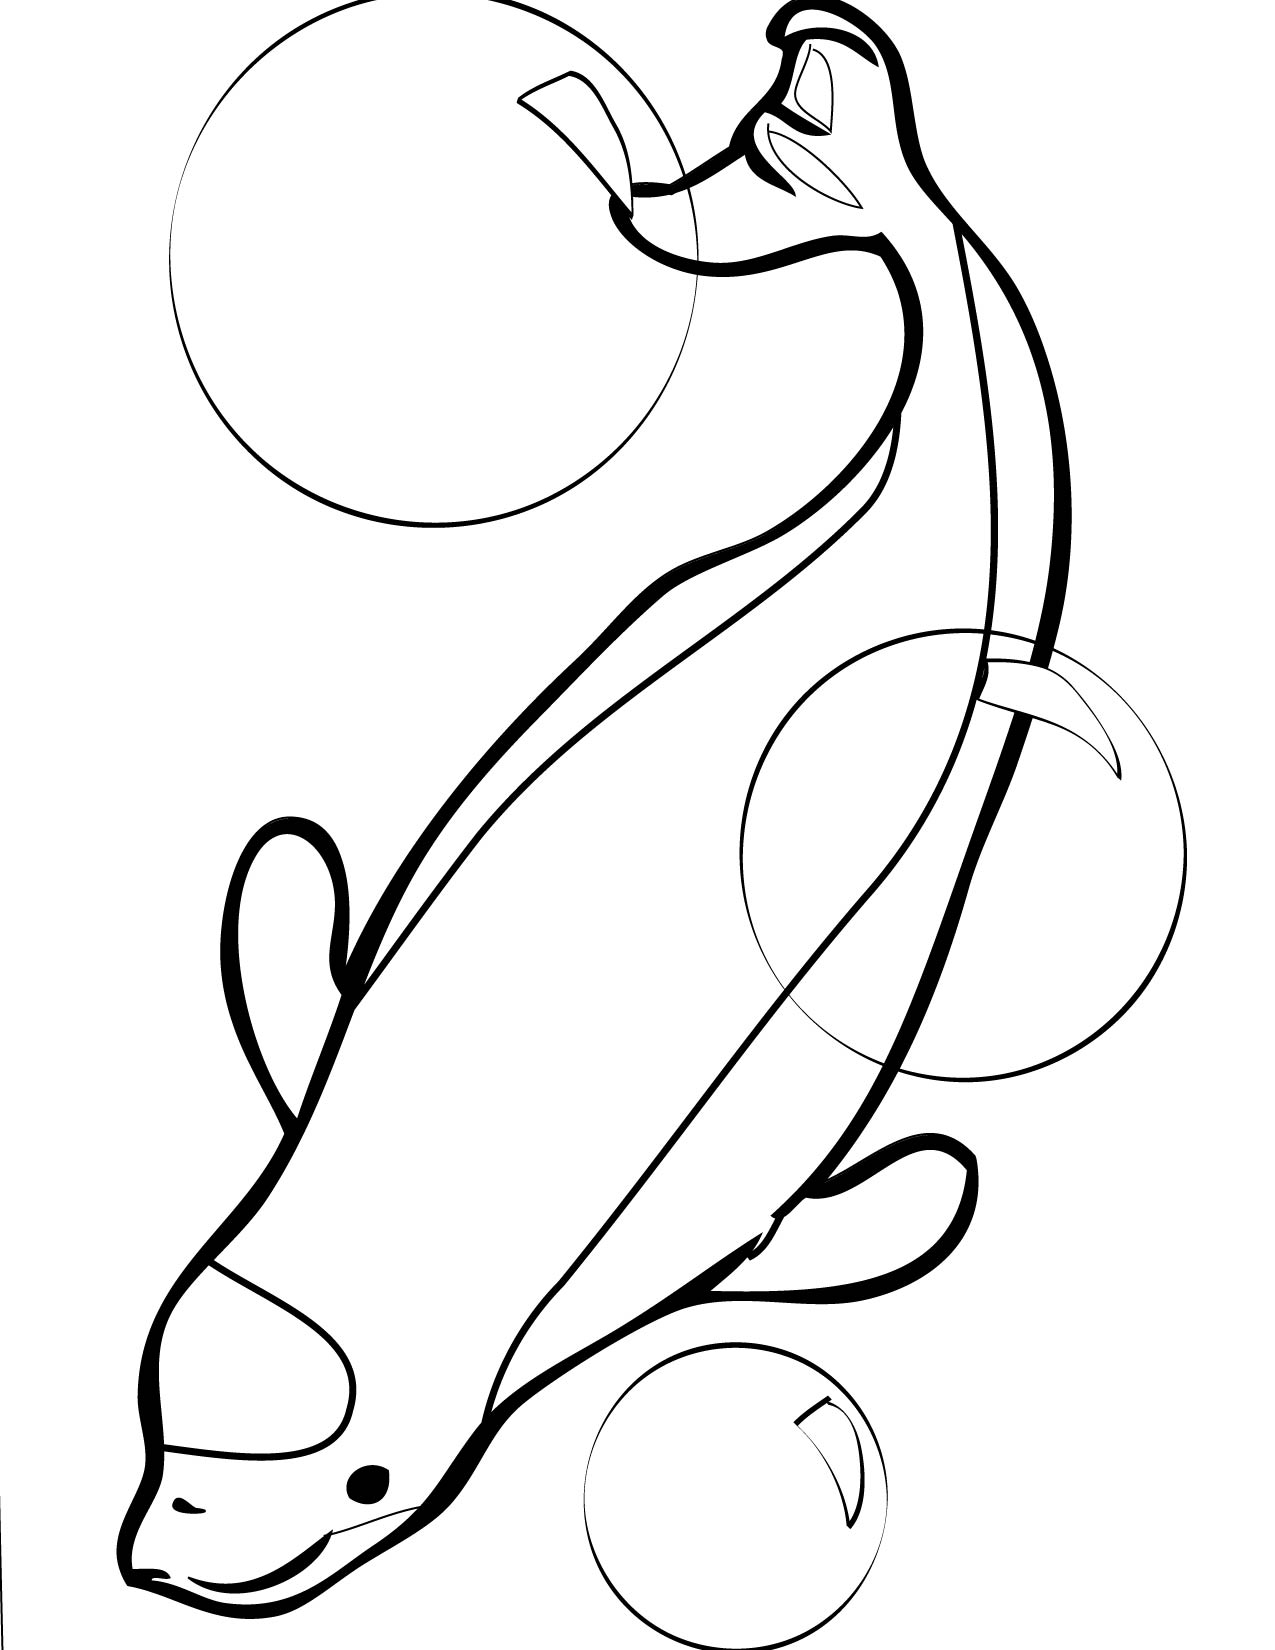 Simple Beluga Coloring Page for Adult